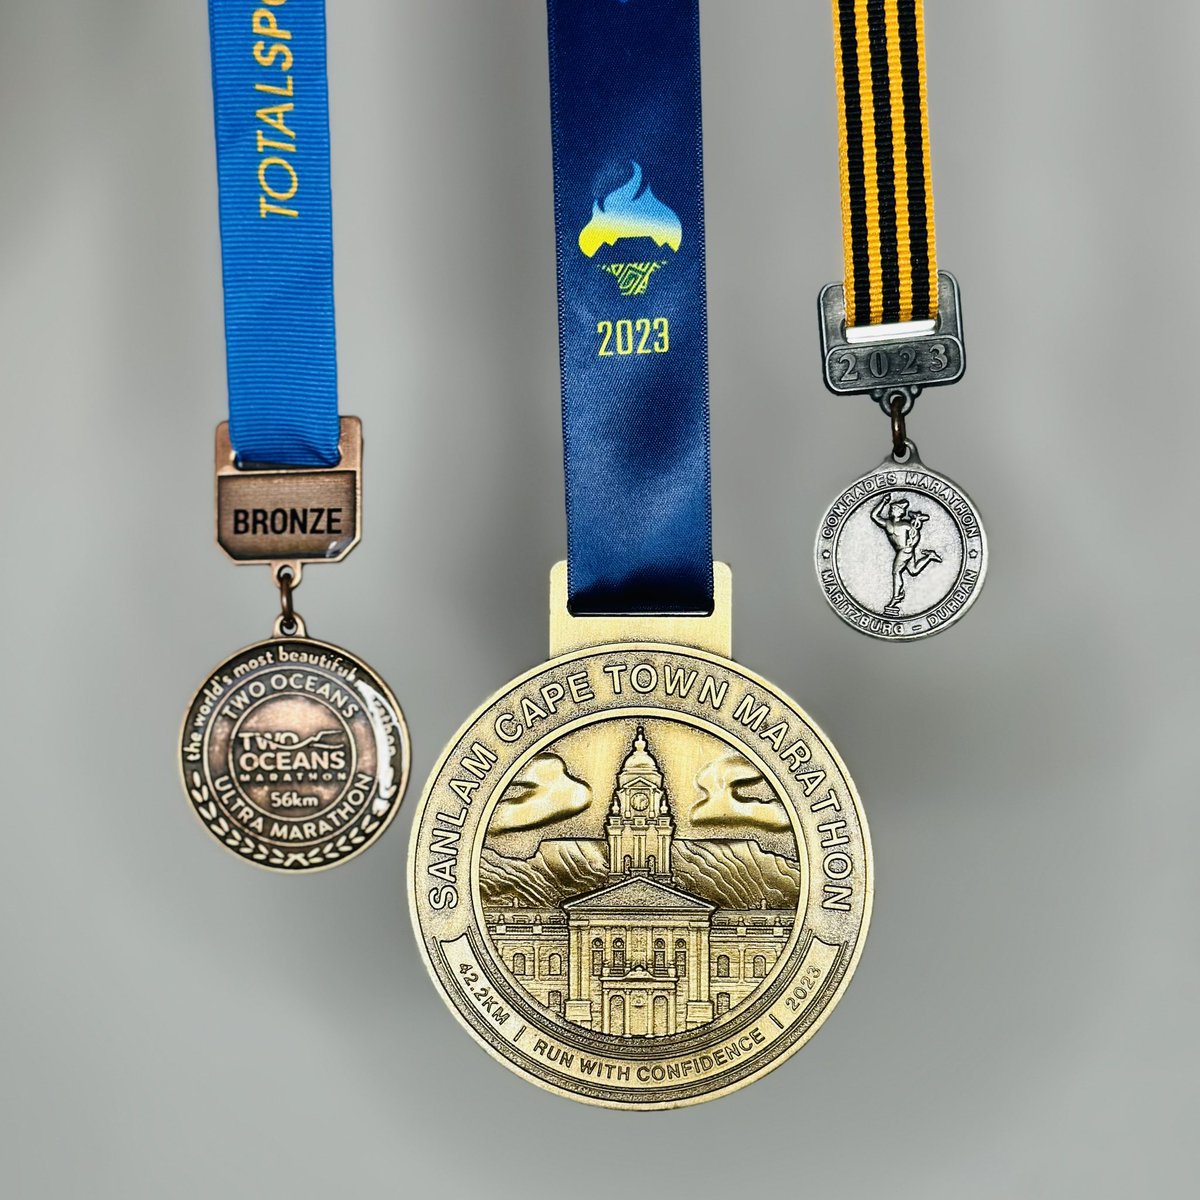 The three medals that matter the most in my collection:
#TwoOceansMarathon - Worlds most  beautiful marathon
#CapeTownMarathon - World Marathon Major Candidate 
#ComradesMarathon - Ultimate Human Race